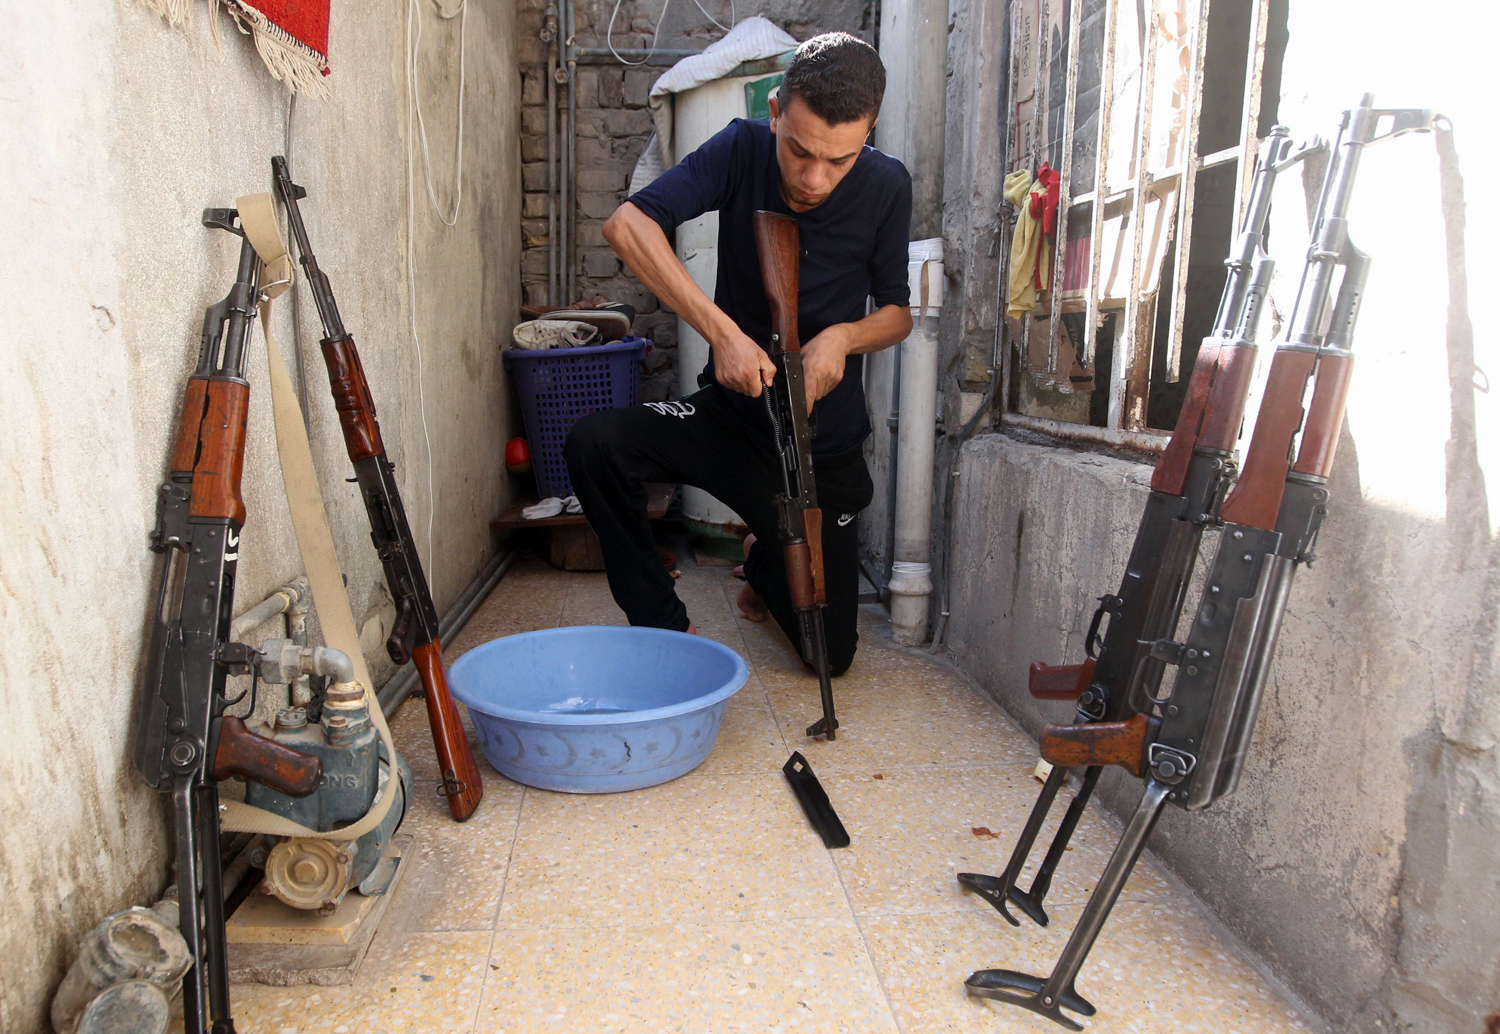 A Shiite man cleans weapons as he gets ready to defend his Sadr City district in case of an attack by Sunni extremists, on June 13 in Baghdad.